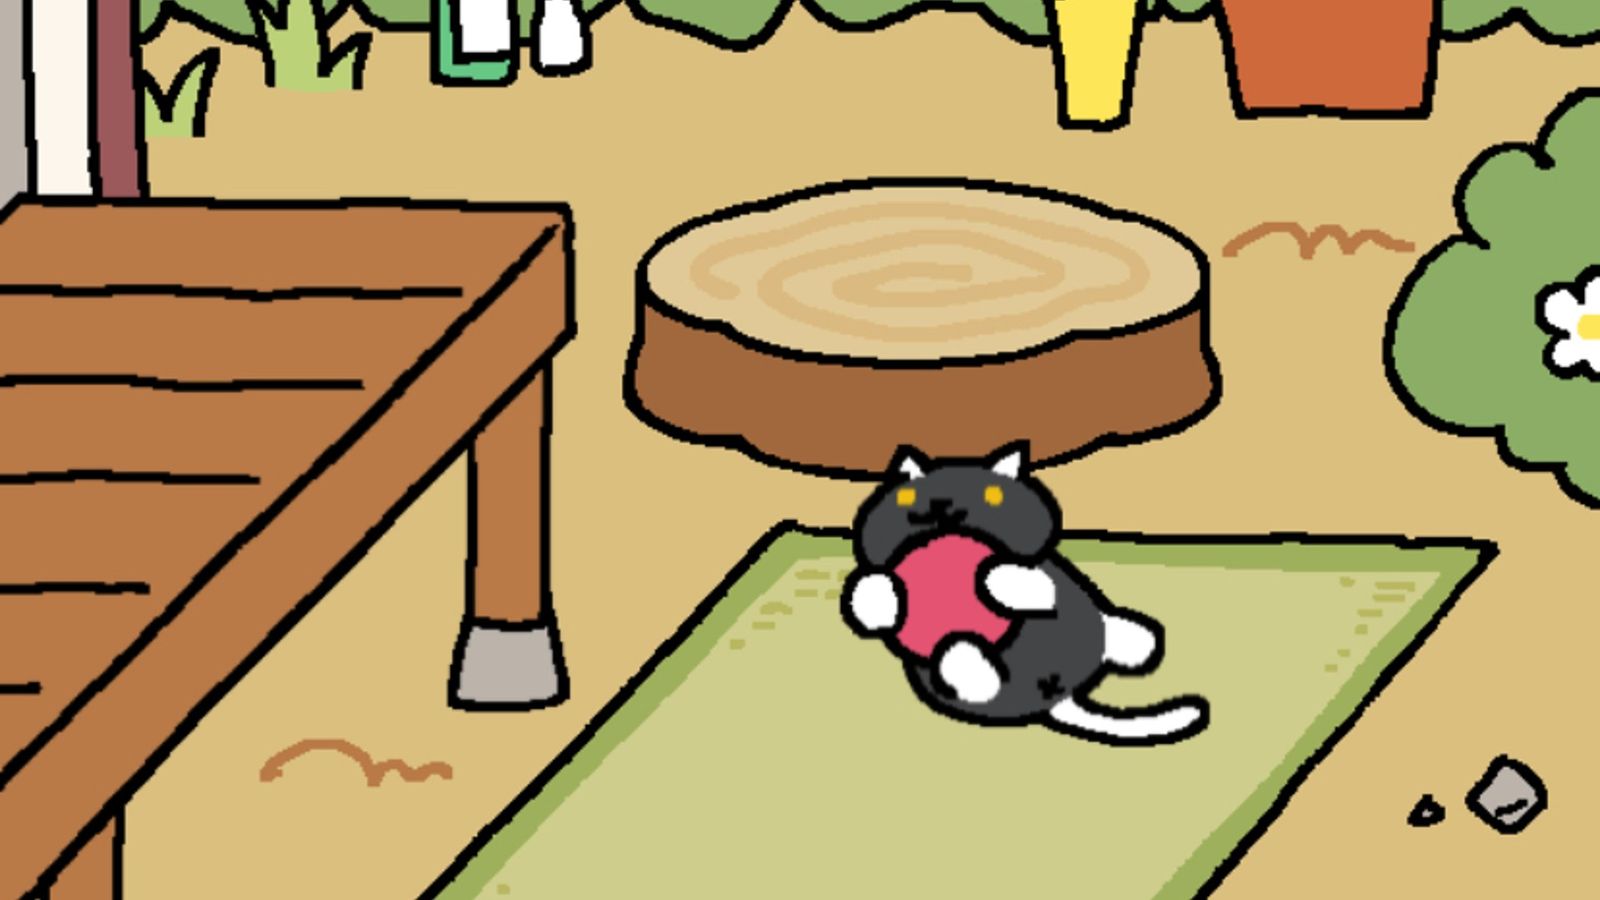 Screenshot from Neko Atsume, showing a black cat playing with a rubber ball